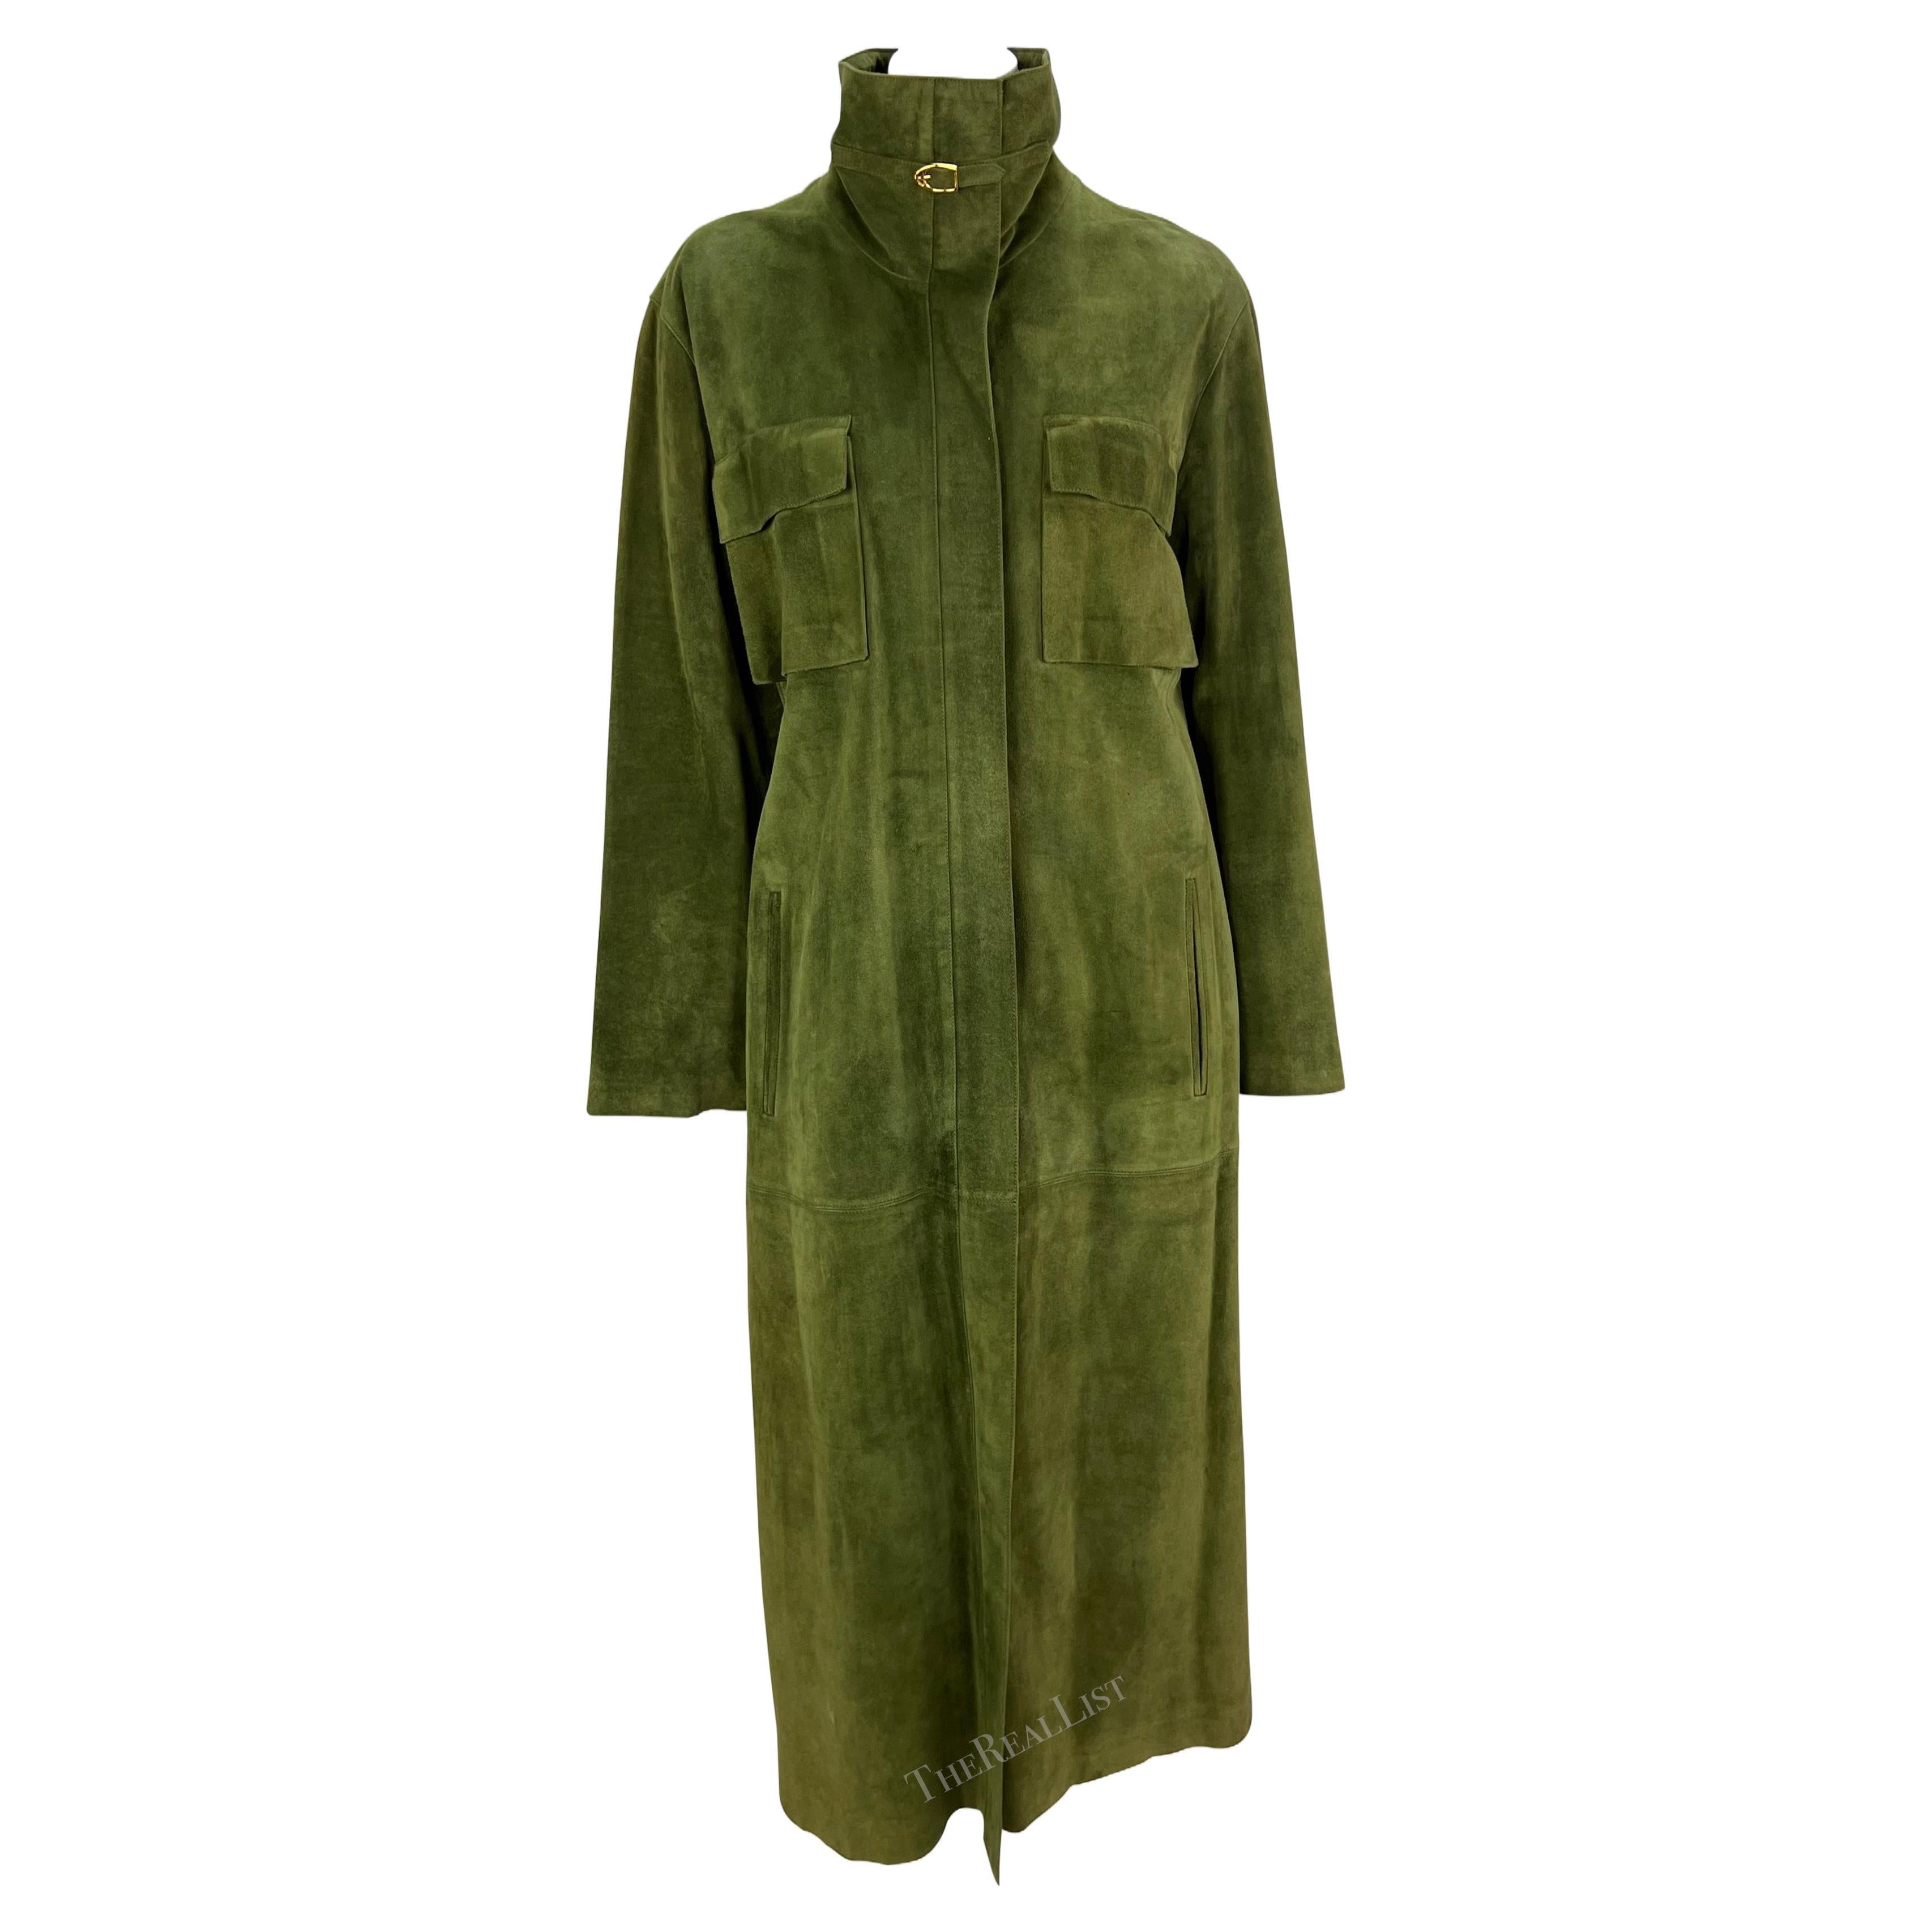 1970s Gucci Stirrup Buckle Green Suede Pocket Full-Length Oversized Trench Coat For Sale